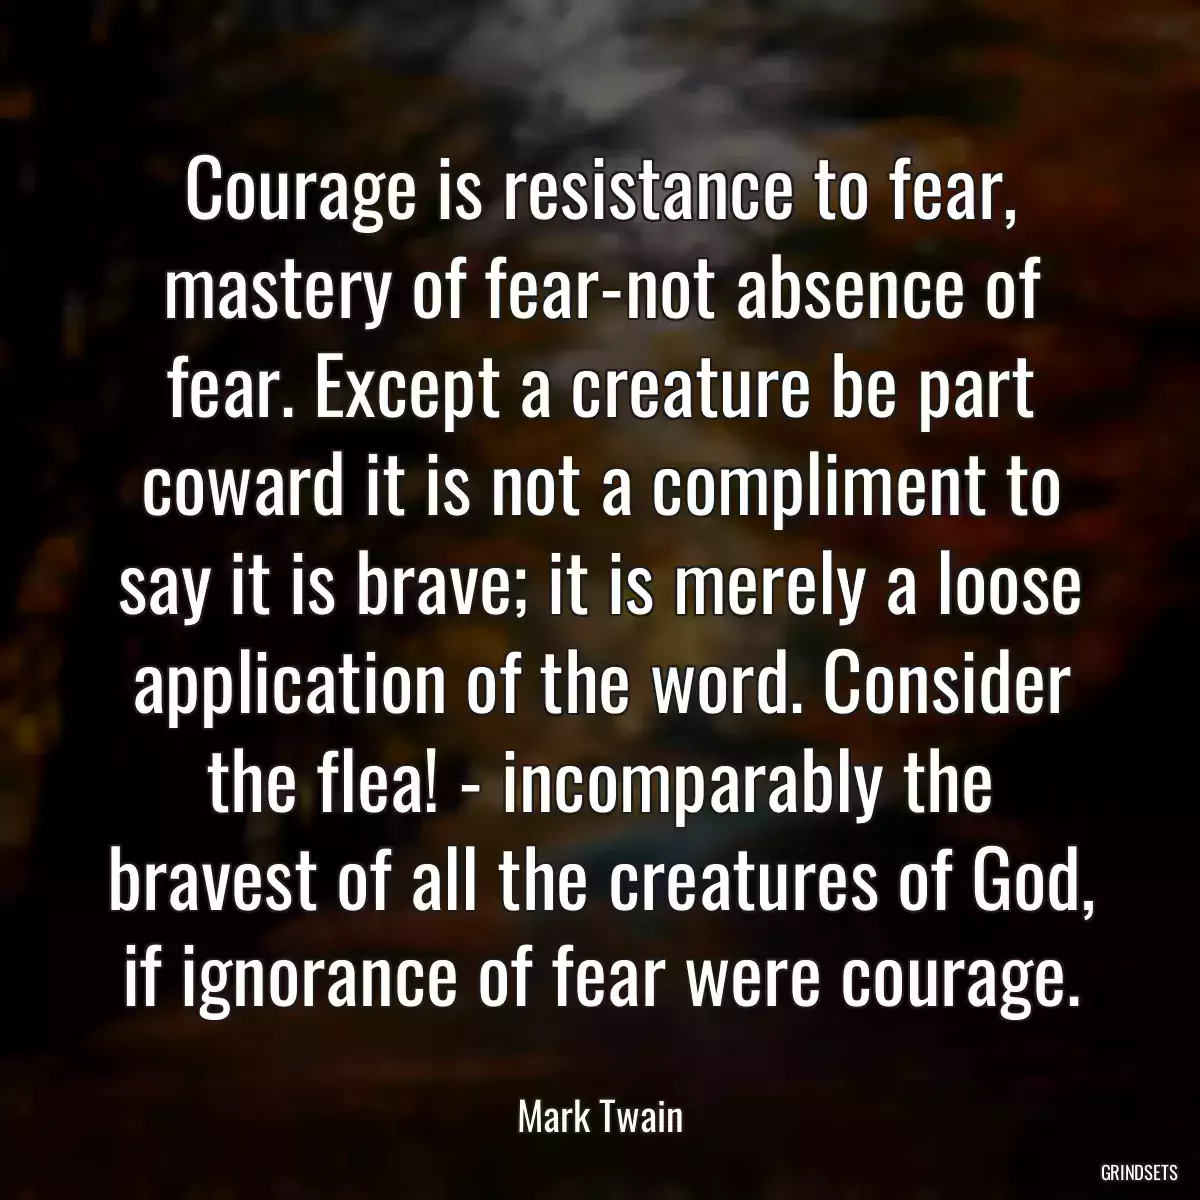 Courage is resistance to fear, mastery of fear-not absence of fear. Except a creature be part coward it is not a compliment to say it is brave; it is merely a loose application of the word. Consider the flea! - incomparably the bravest of all the creatures of God, if ignorance of fear were courage.